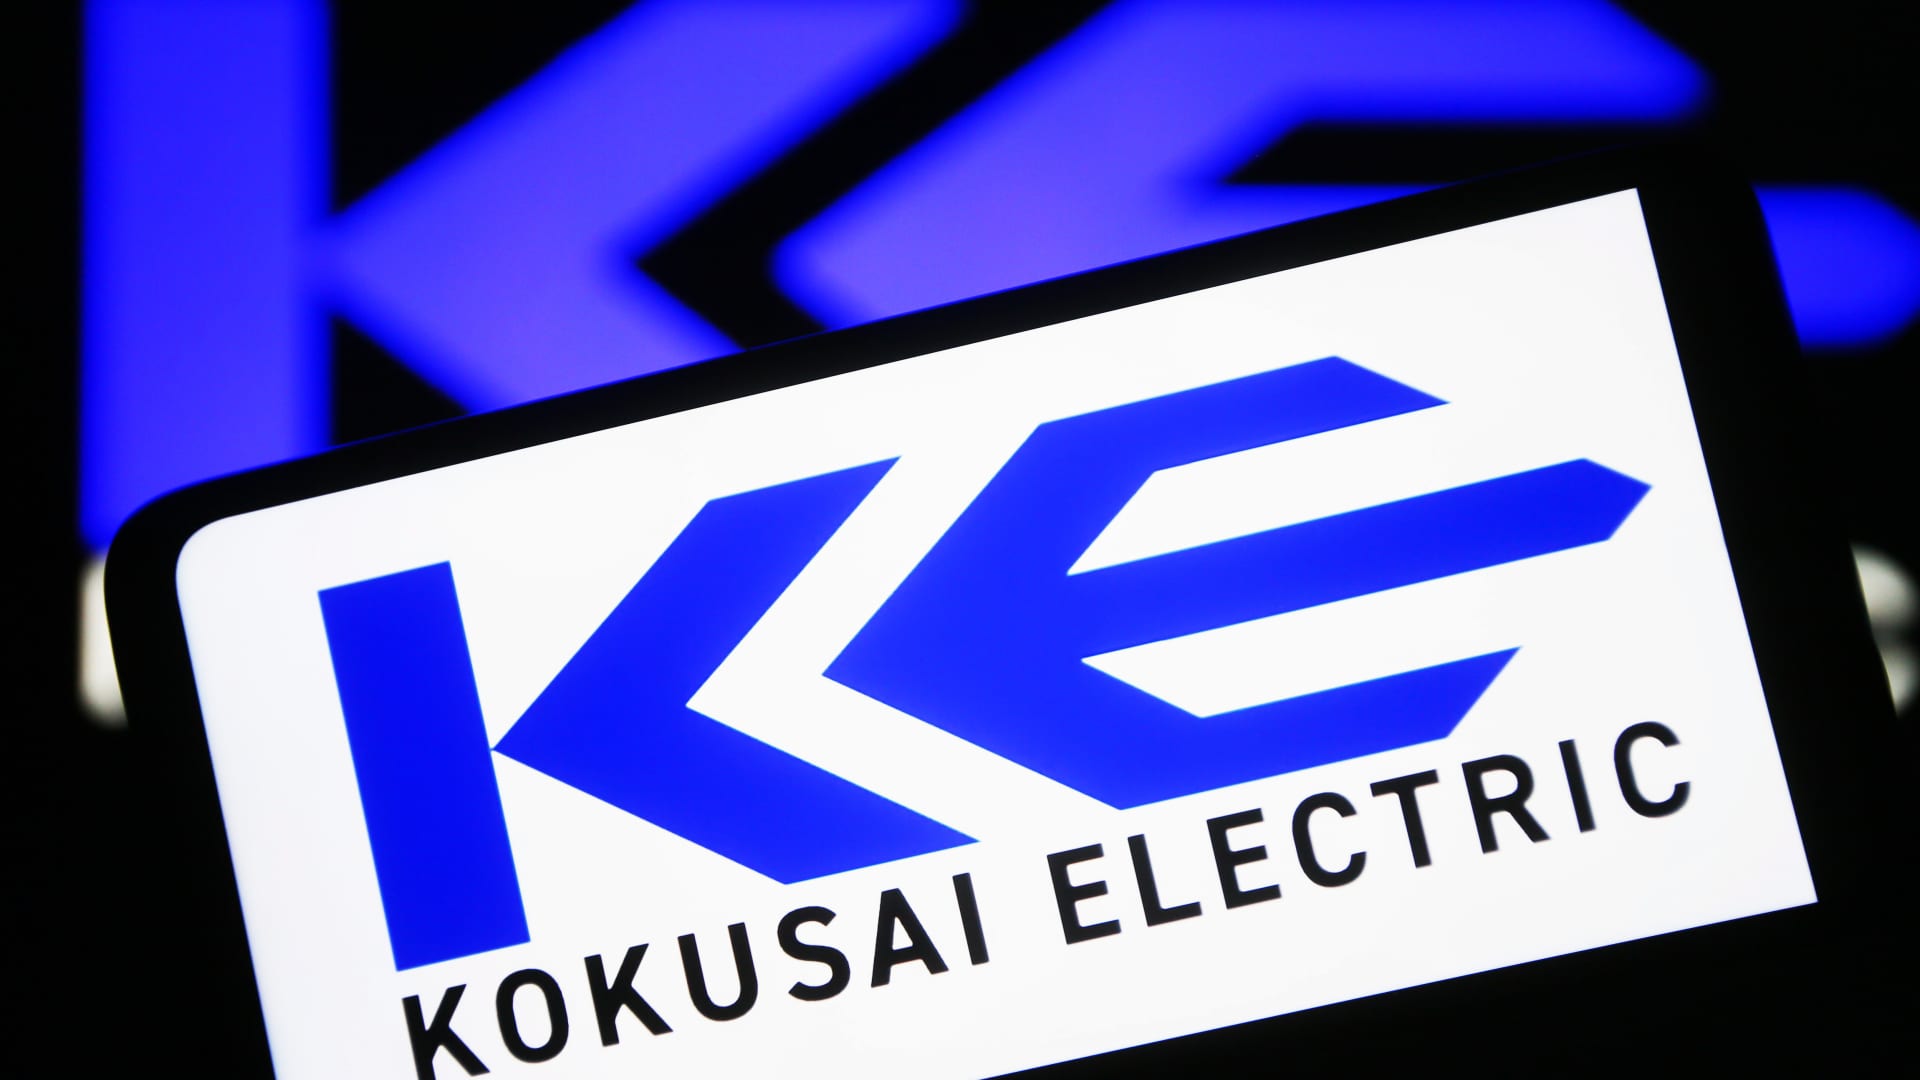 Shares of Kokusai Electric up more than 30% in Tokyo debut